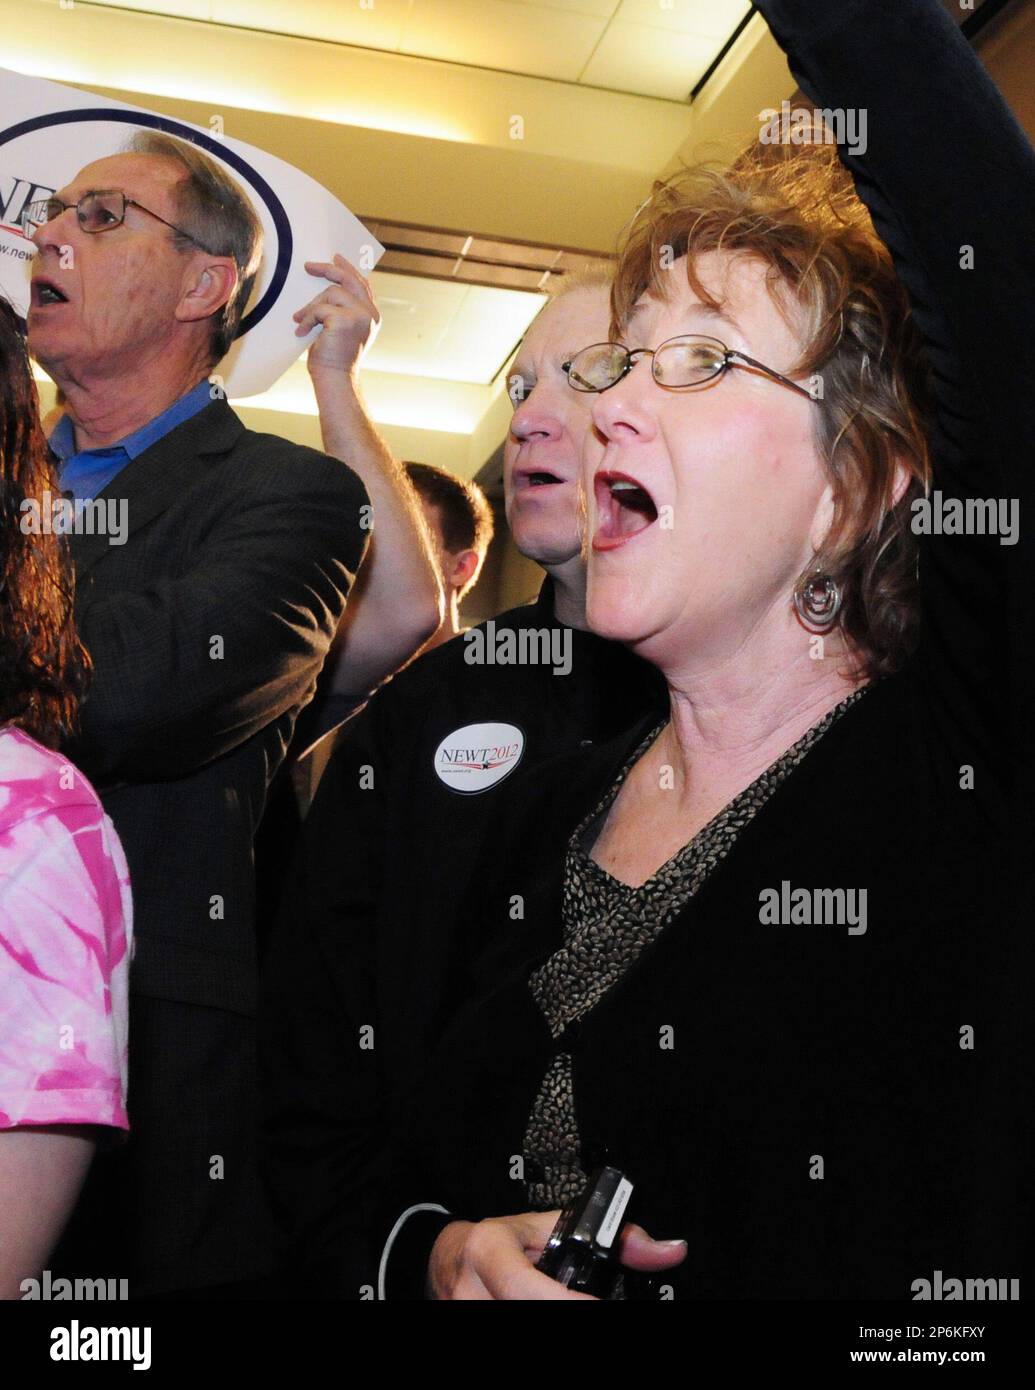 Carol Grohn, of Chattanooga, Tenn., cheers on Republican presidential  candidate Newt Gingrich at the Northwest Trade and Convention Center in  Dalton, Ga., Tuesday, Feb. 28, 2012. (AP Photo/The Daily Citizen, Misty  Watson)